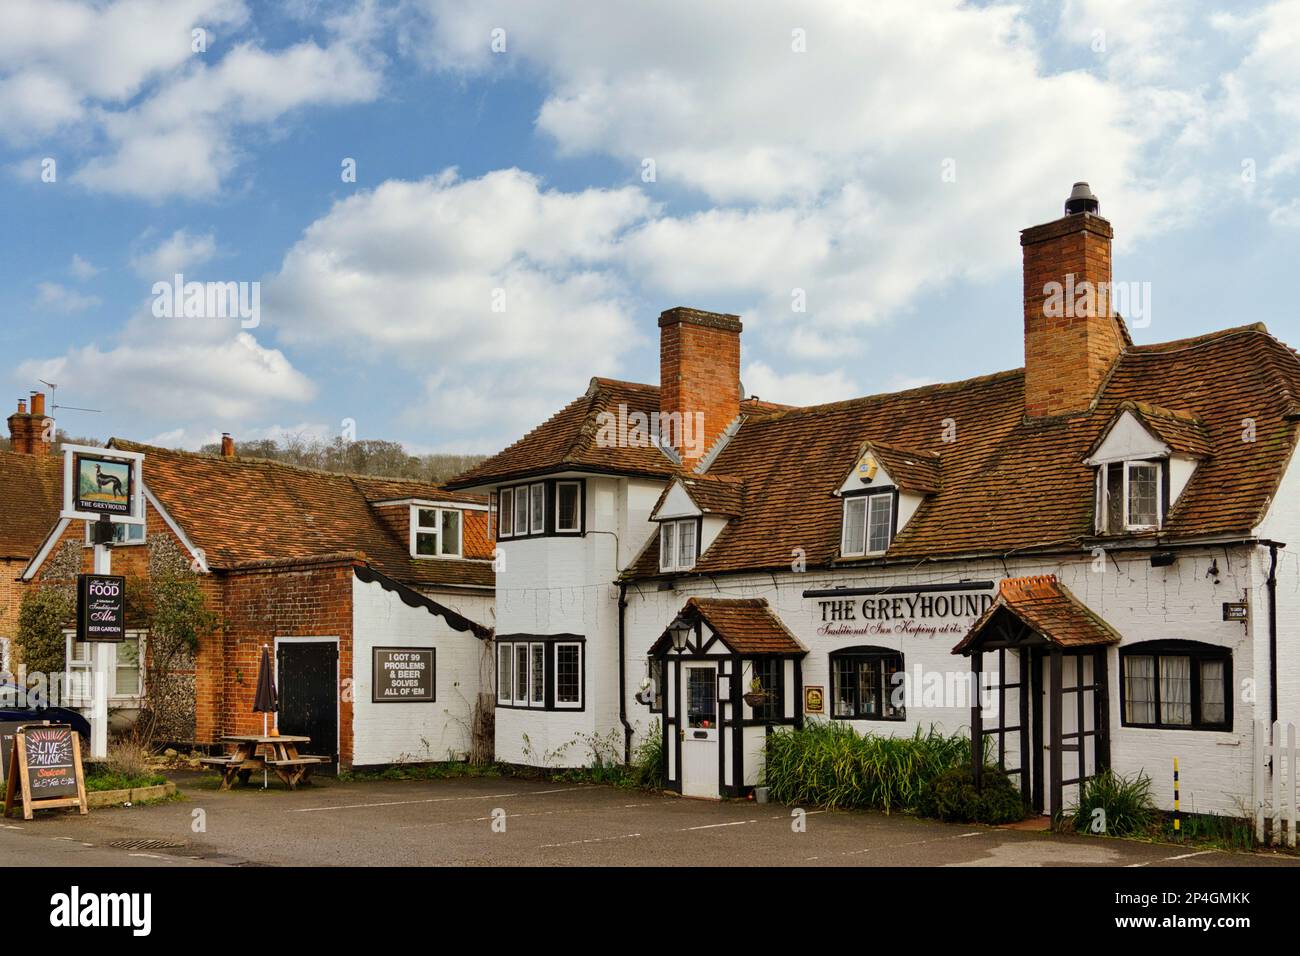 The Greyhound, Whitchurch- on-Thames, Oxfordshire, UK Stock Photo